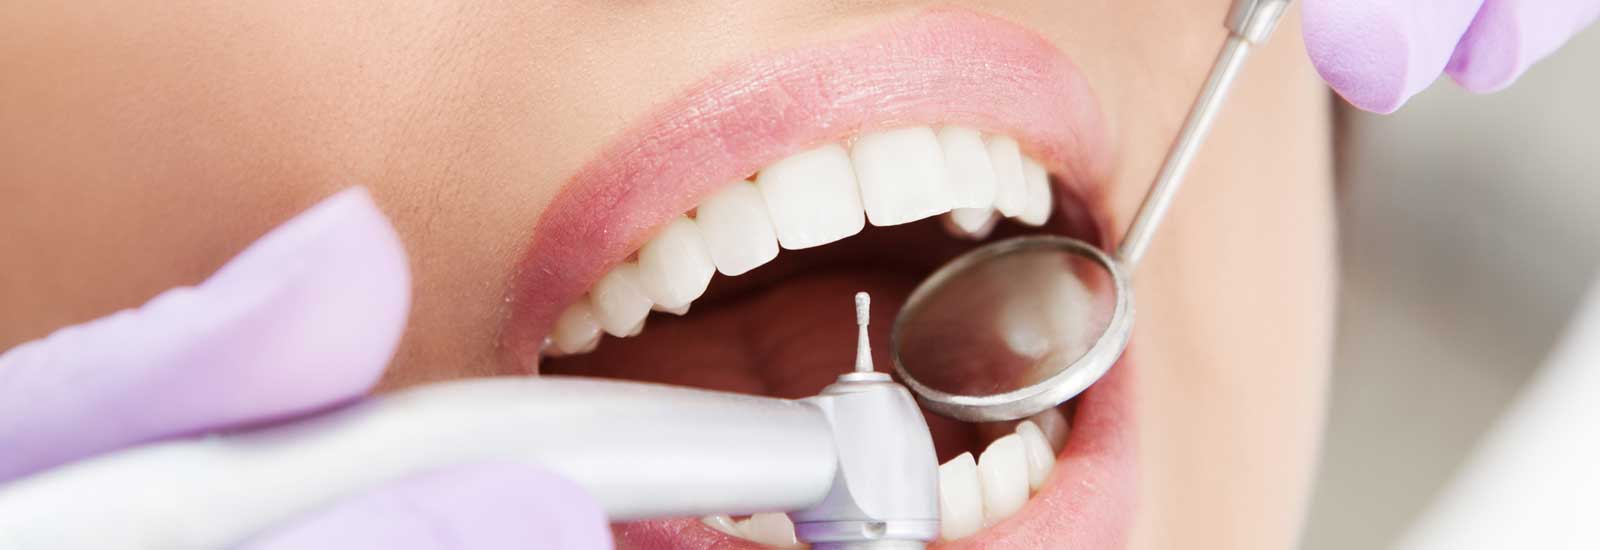 Replace missing teeth with dental implants